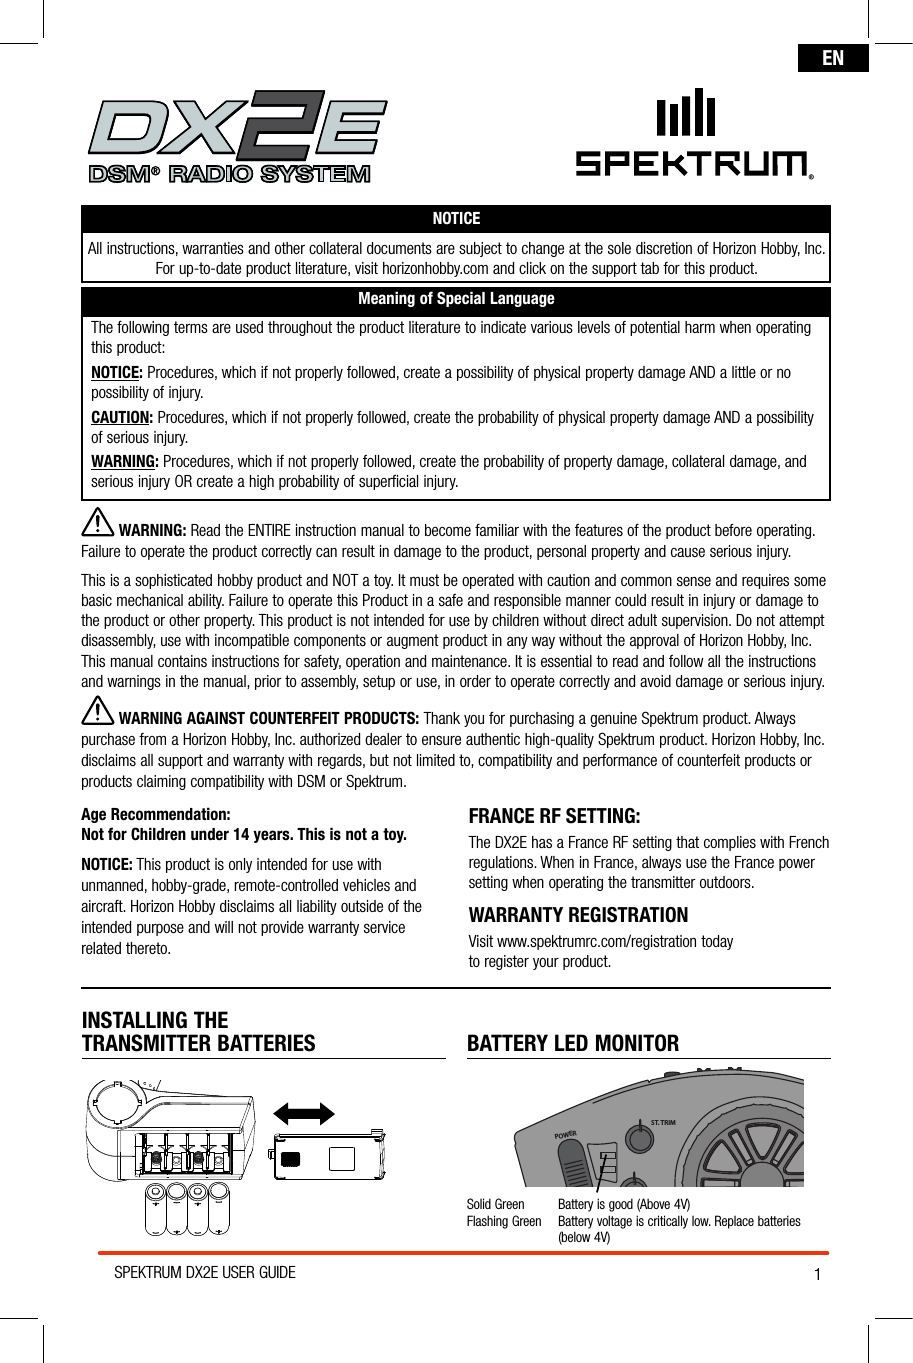 1SPEKTRUM DX2E USER GUIDEENNOTICEAll instructions, warranties and other collateral documents are subject to change at the sole discretion of Horizon Hobby, Inc. For up-to-date product literature, visit horizonhobby.com and click on the support tab for this product.Meaning of Special LanguageThe following terms are used throughout the product literature to indicate various levels of potential harm when operating this product:NOTICE: Procedures, which if not properly followed, create a possibility of physical property damage AND a little or no possibility of injury.CAUTION: Procedures, which if not properly followed, create the probability of physical property damage AND a possibility  of serious injury.WARNING: Procedures, which if not properly followed, create the probability of property damage, collateral damage, and serious injury OR create a high probability of superficial injury. INSTALLING THE  TRANSMITTER BATTERIES  BATTERY LED MONITORSolid Green  Battery is good (Above 4V)Flashing Green   Battery voltage is critically low. Replace batteries  (below 4V)®POWERST. TRIMTH. TRIMST. RATE WARNING: Read the ENTIRE instruction manual to become familiar with the features of the product before operating. Failure to operate the product correctly can result in damage to the product, personal property and cause serious injury. This is a sophisticated hobby product and NOT a toy. It must be operated with caution and common sense and requires some basic mechanical ability. Failure to operate this Product in a safe and responsible manner could result in injury or damage to the product or other property. This product is not intended for use by children without direct adult supervision. Do not attempt disassembly, use with incompatible components or augment product in any way without the approval of Horizon Hobby, Inc. This manual contains instructions for safety, operation and maintenance. It is essential to read and follow all the instructions and warnings in the manual, prior to assembly, setup or use, in order to operate correctly and avoid damage or serious injury. WARNING AGAINST COUNTERFEIT PRODUCTS: Thank you for purchasing a genuine Spektrum product. Always purchase from a Horizon Hobby, Inc. authorized dealer to ensure authentic high-quality Spektrum product. Horizon Hobby, Inc. disclaims all support and warranty with regards, but not limited to, compatibility and performance of counterfeit products or products claiming compatibility with DSM or Spektrum.Age Recommendation:  Not for Children under 14 years. This is not a toy.NOTICE: This product is only intended for use with unmanned, hobby-grade, remote-controlled vehicles and aircraft. Horizon Hobby disclaims all liability outside of the intended purpose and will not provide warranty service related thereto.FRANCE RF SETTING:  The DX2E has a France RF setting that complies with French regulations. When in France, always use the France power setting when operating the transmitter outdoors. WARRANTY REGISTRATIONVisit www.spektrumrc.com/registration today  to register your product.